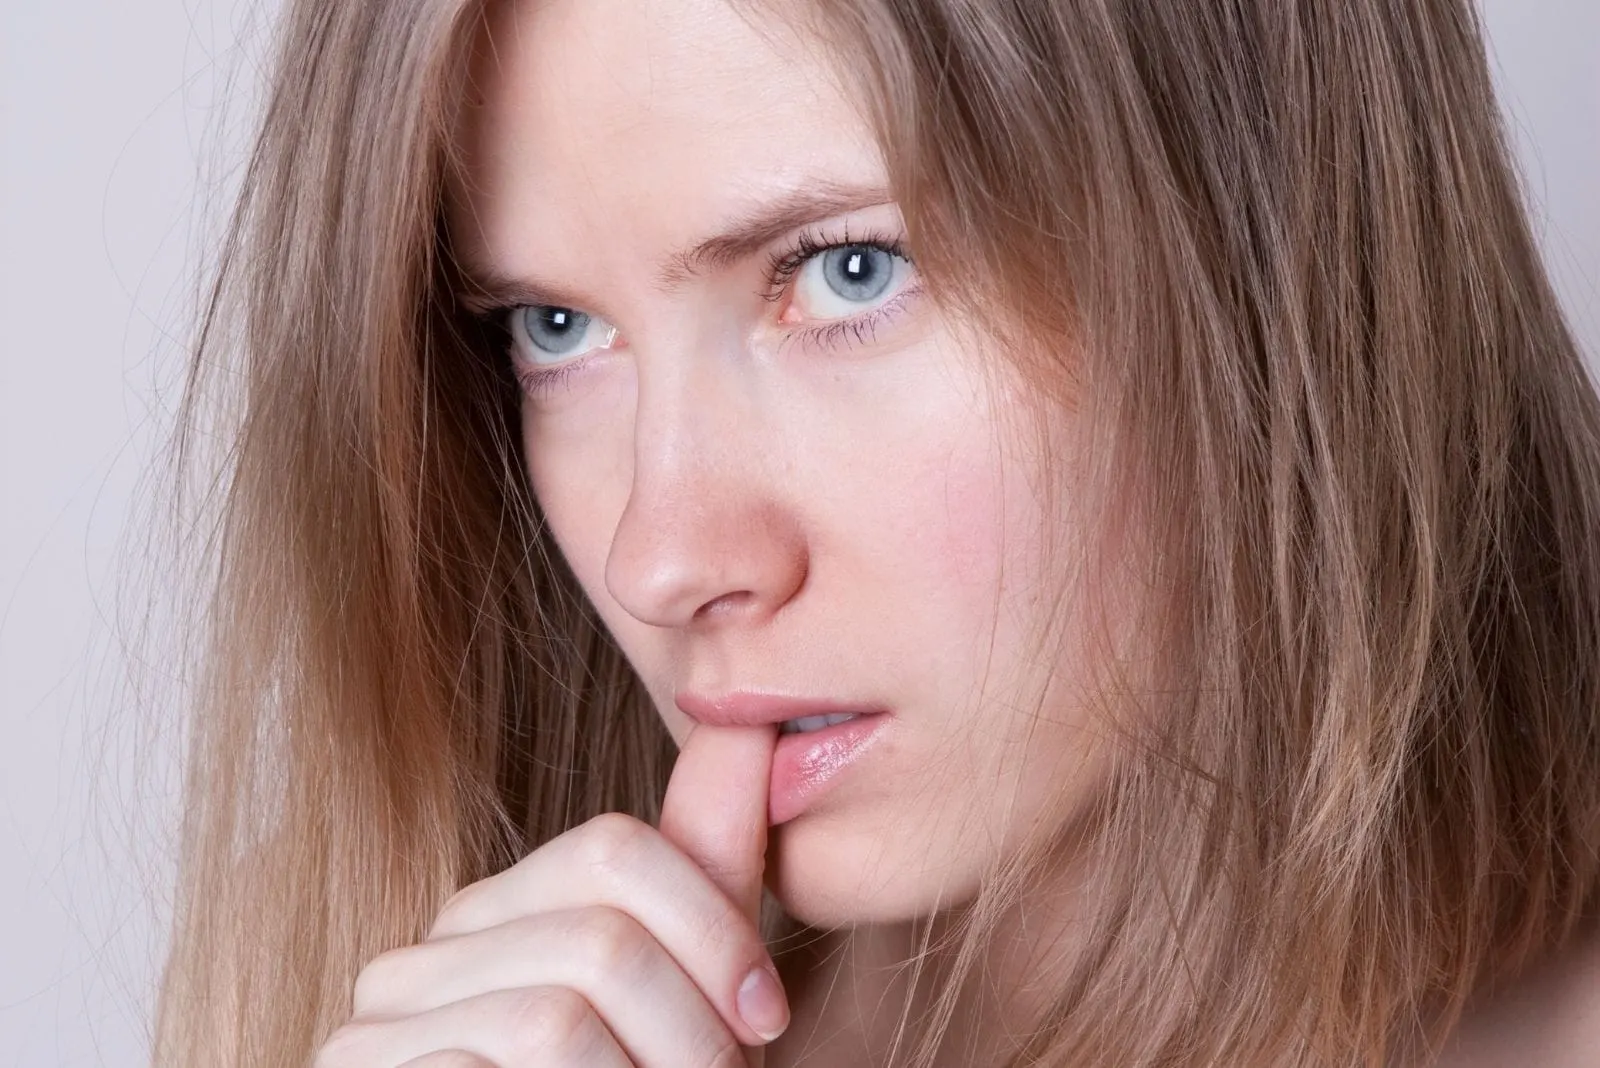 woman with a blue eye looking furiously biting her thumb